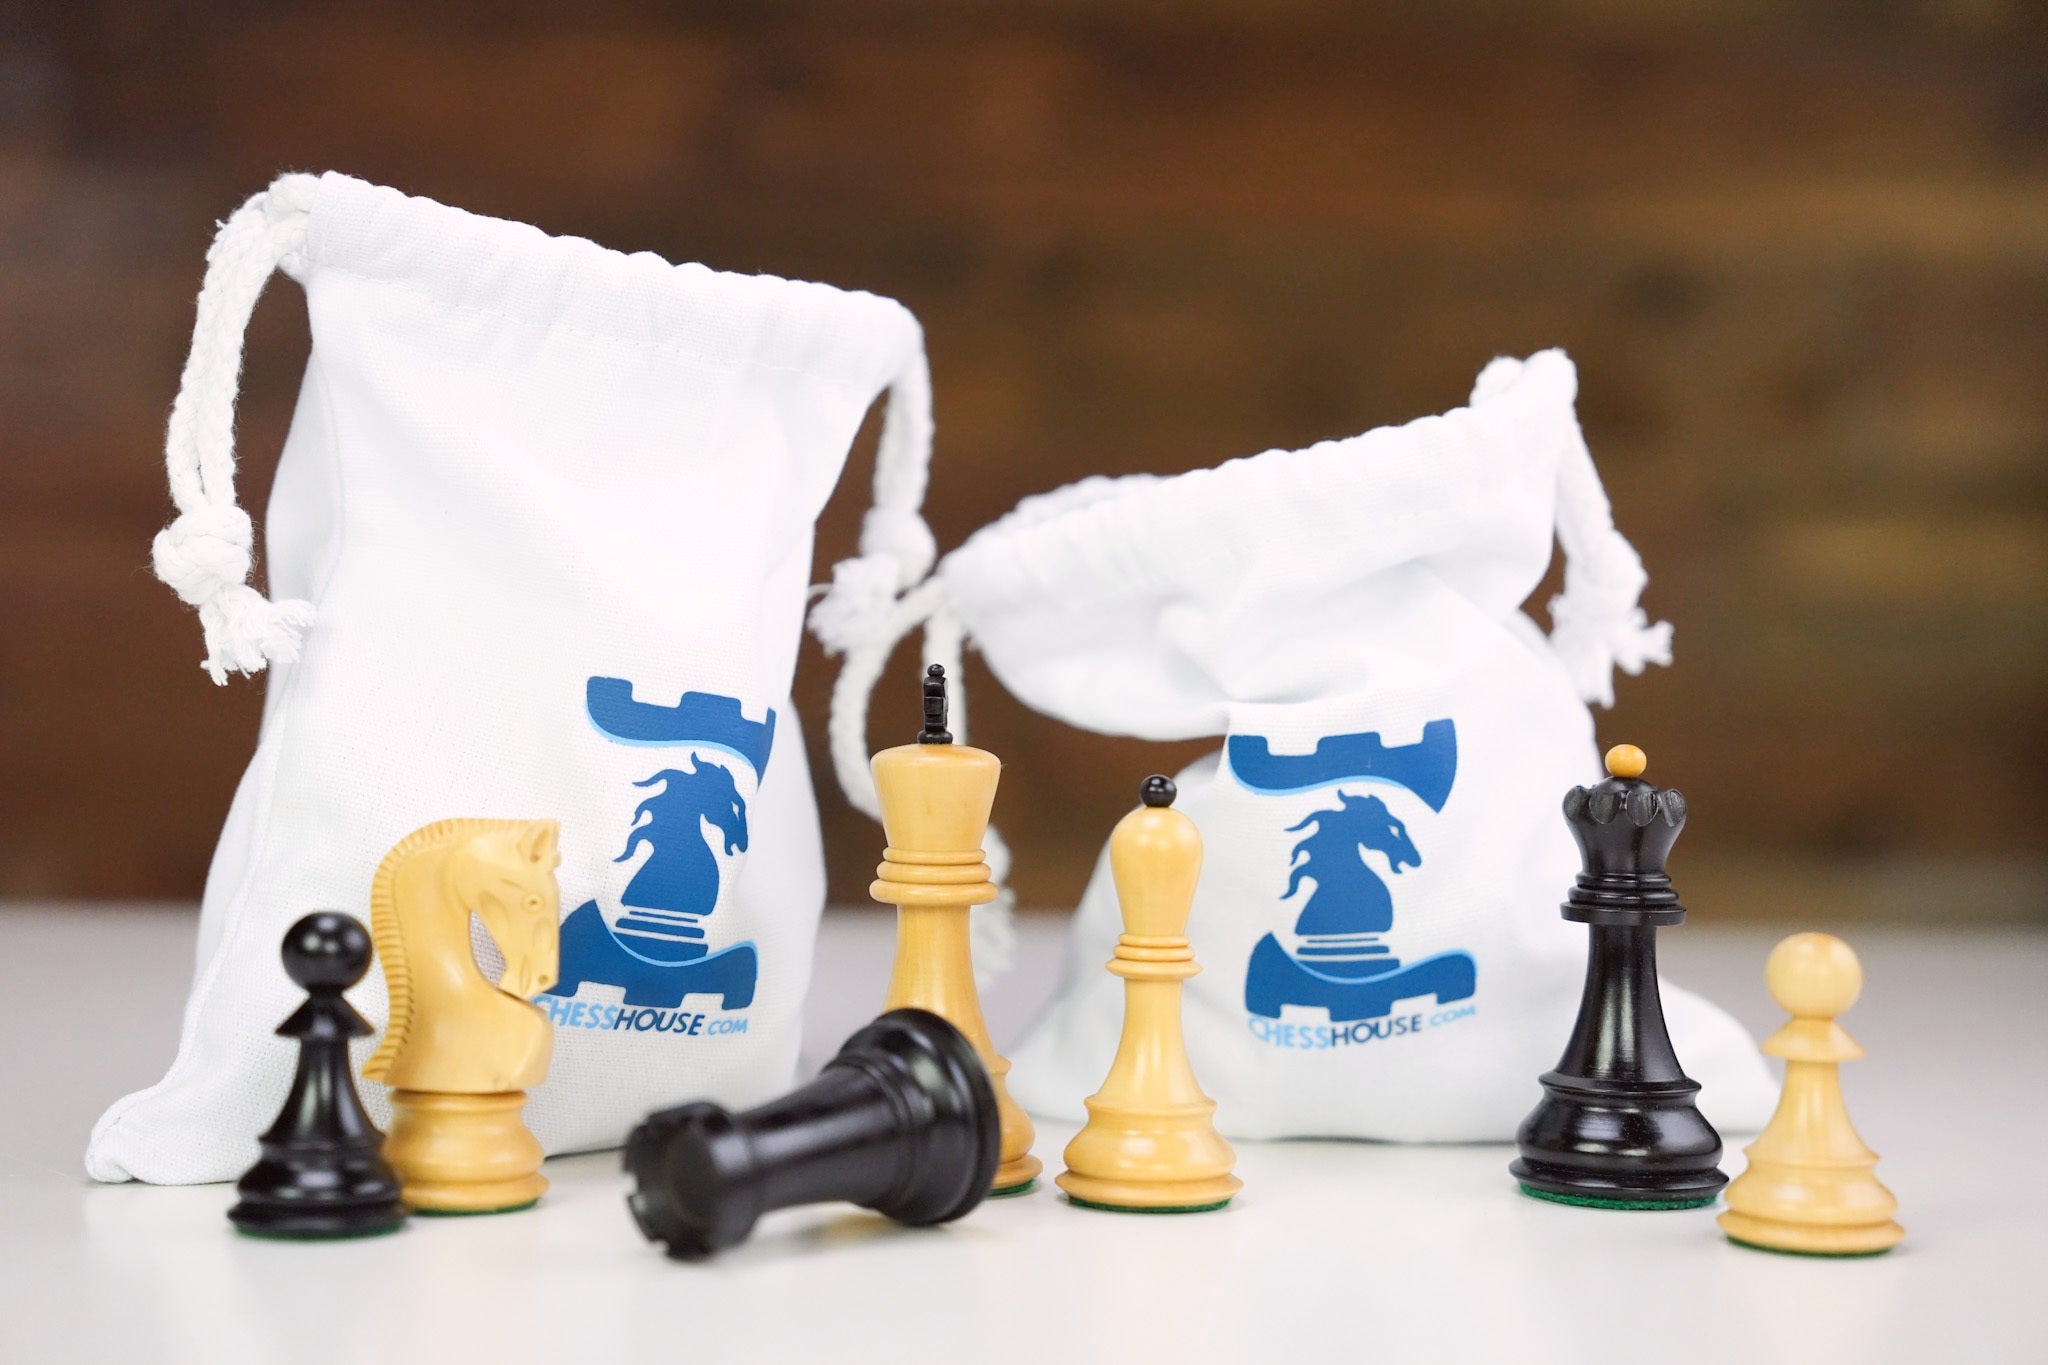 The 4" Zagreb Chess Set Combo with Storage - Chess Set - Chess-House